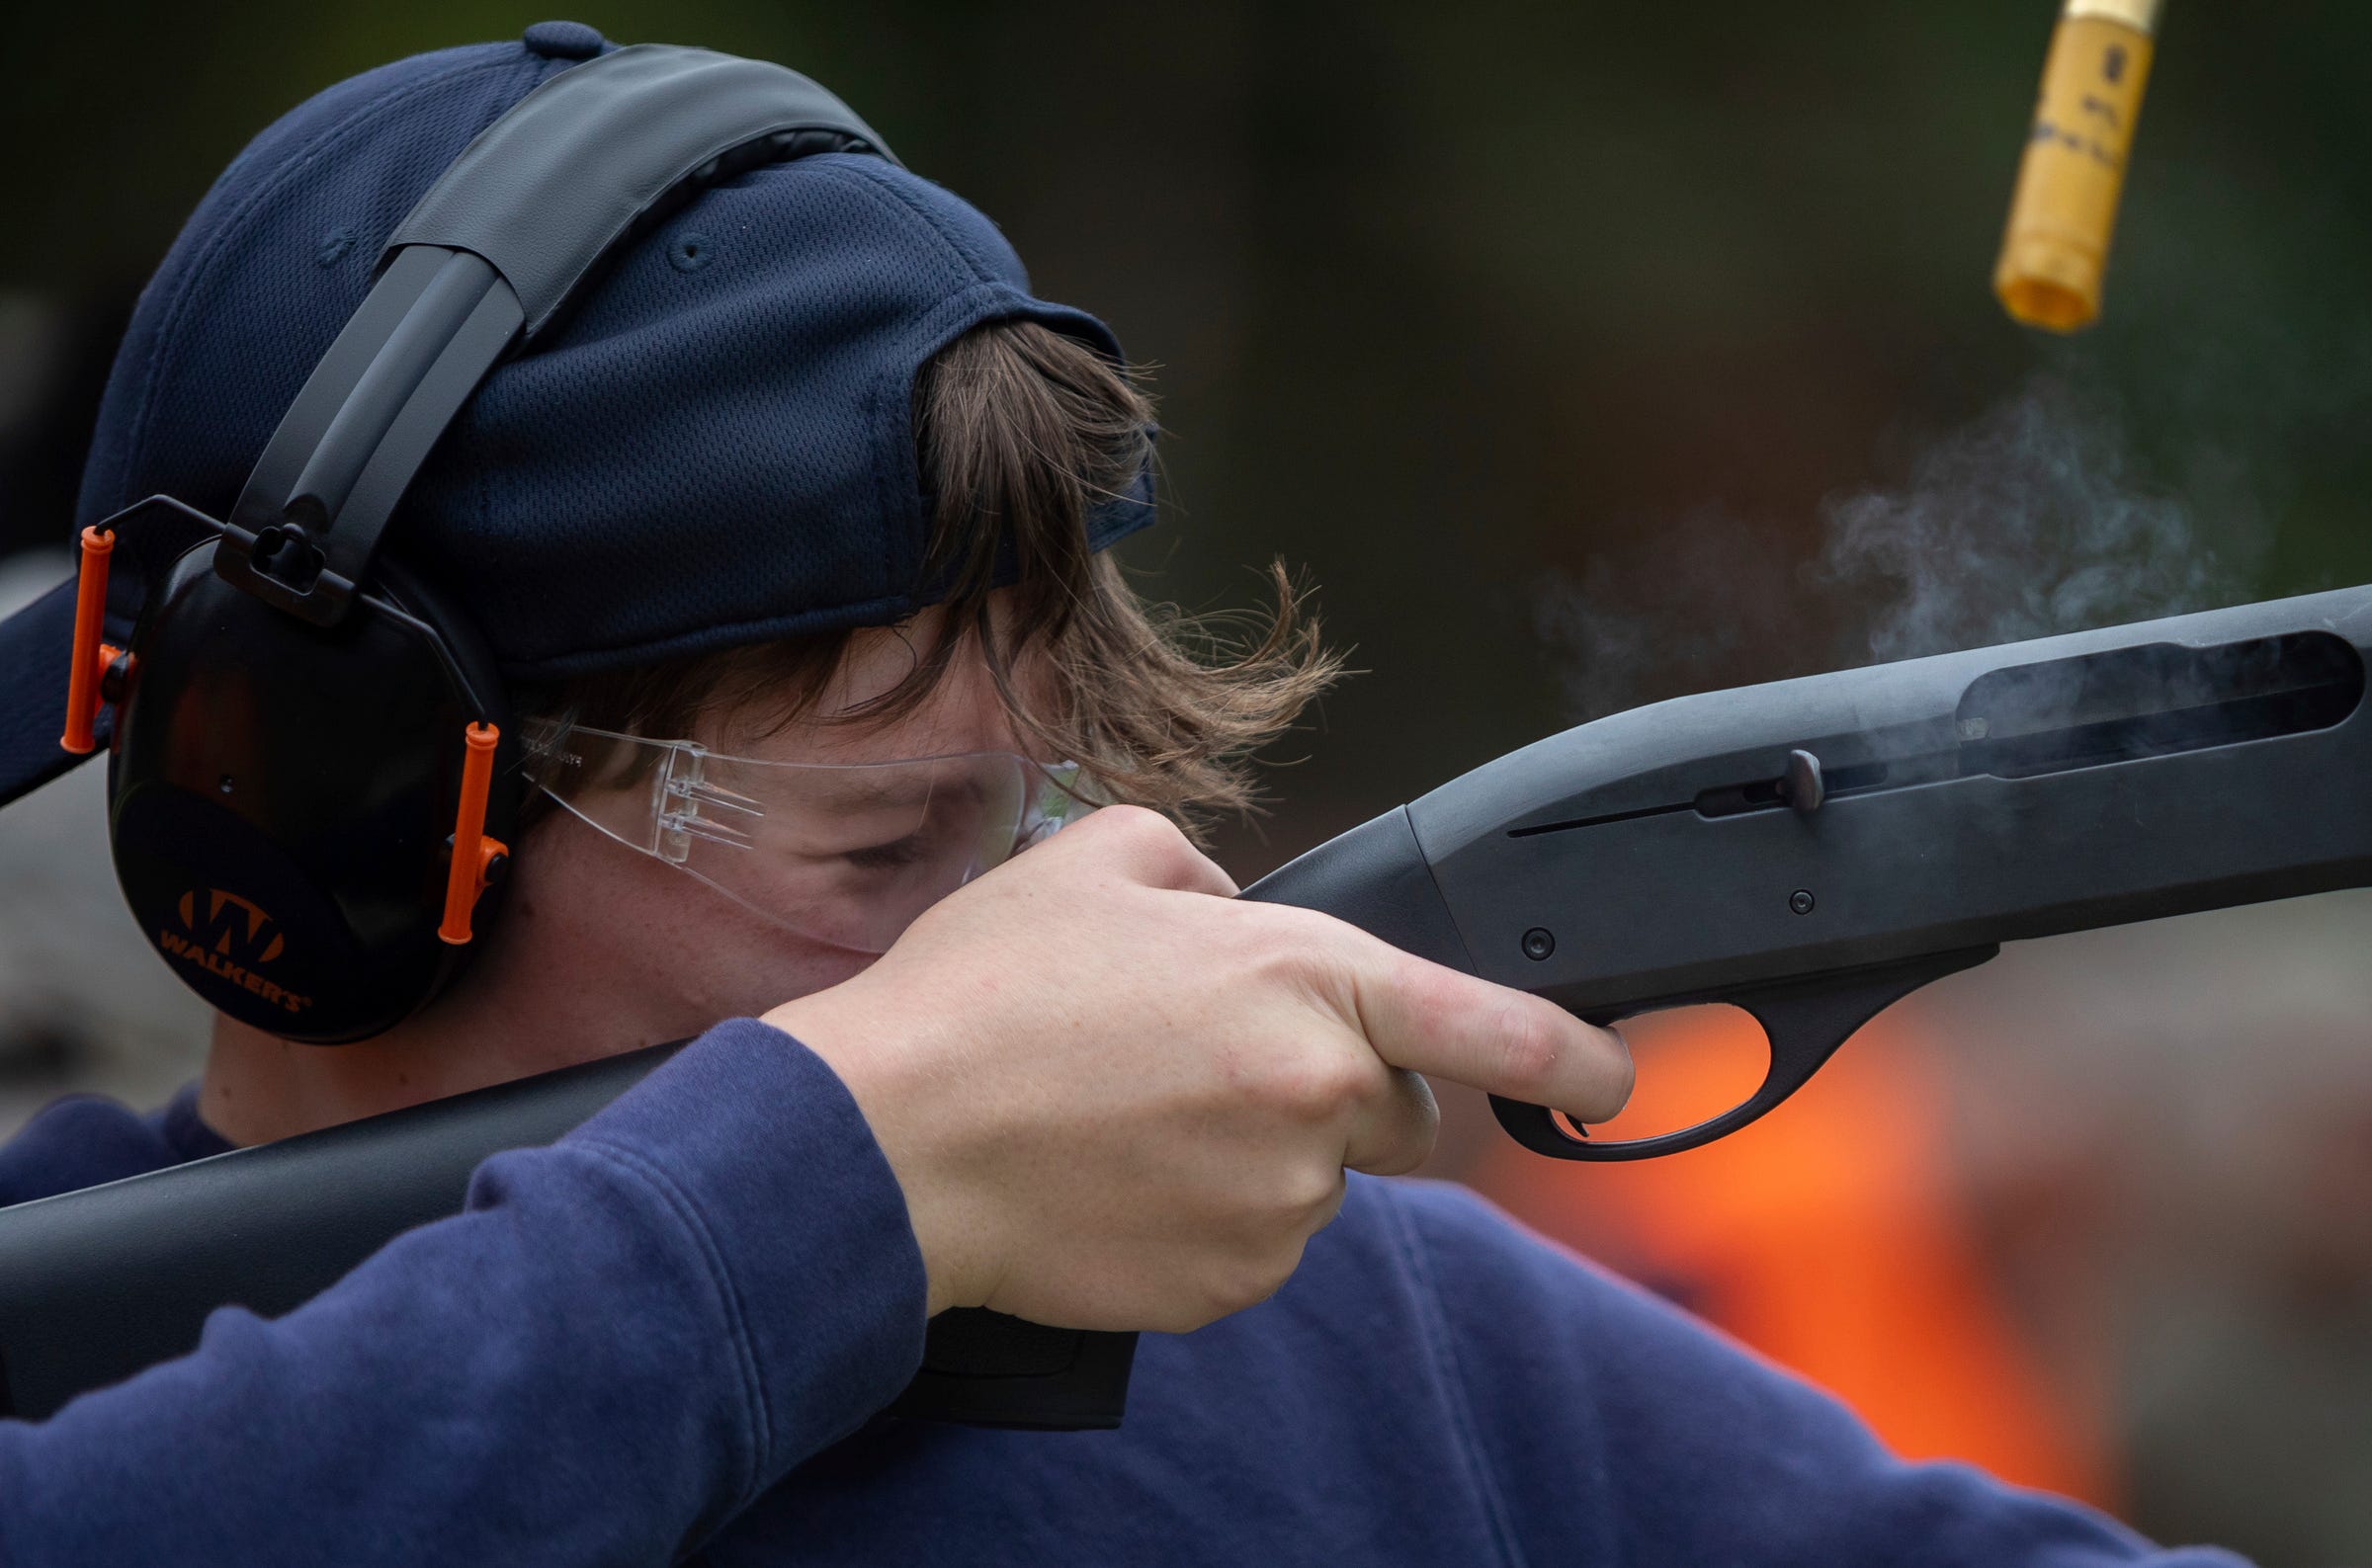 Richard Cooper, 12, closes his eyes as he shoots a clay target during a Hunter Safety Field Day at the Washtenaw Sportsman